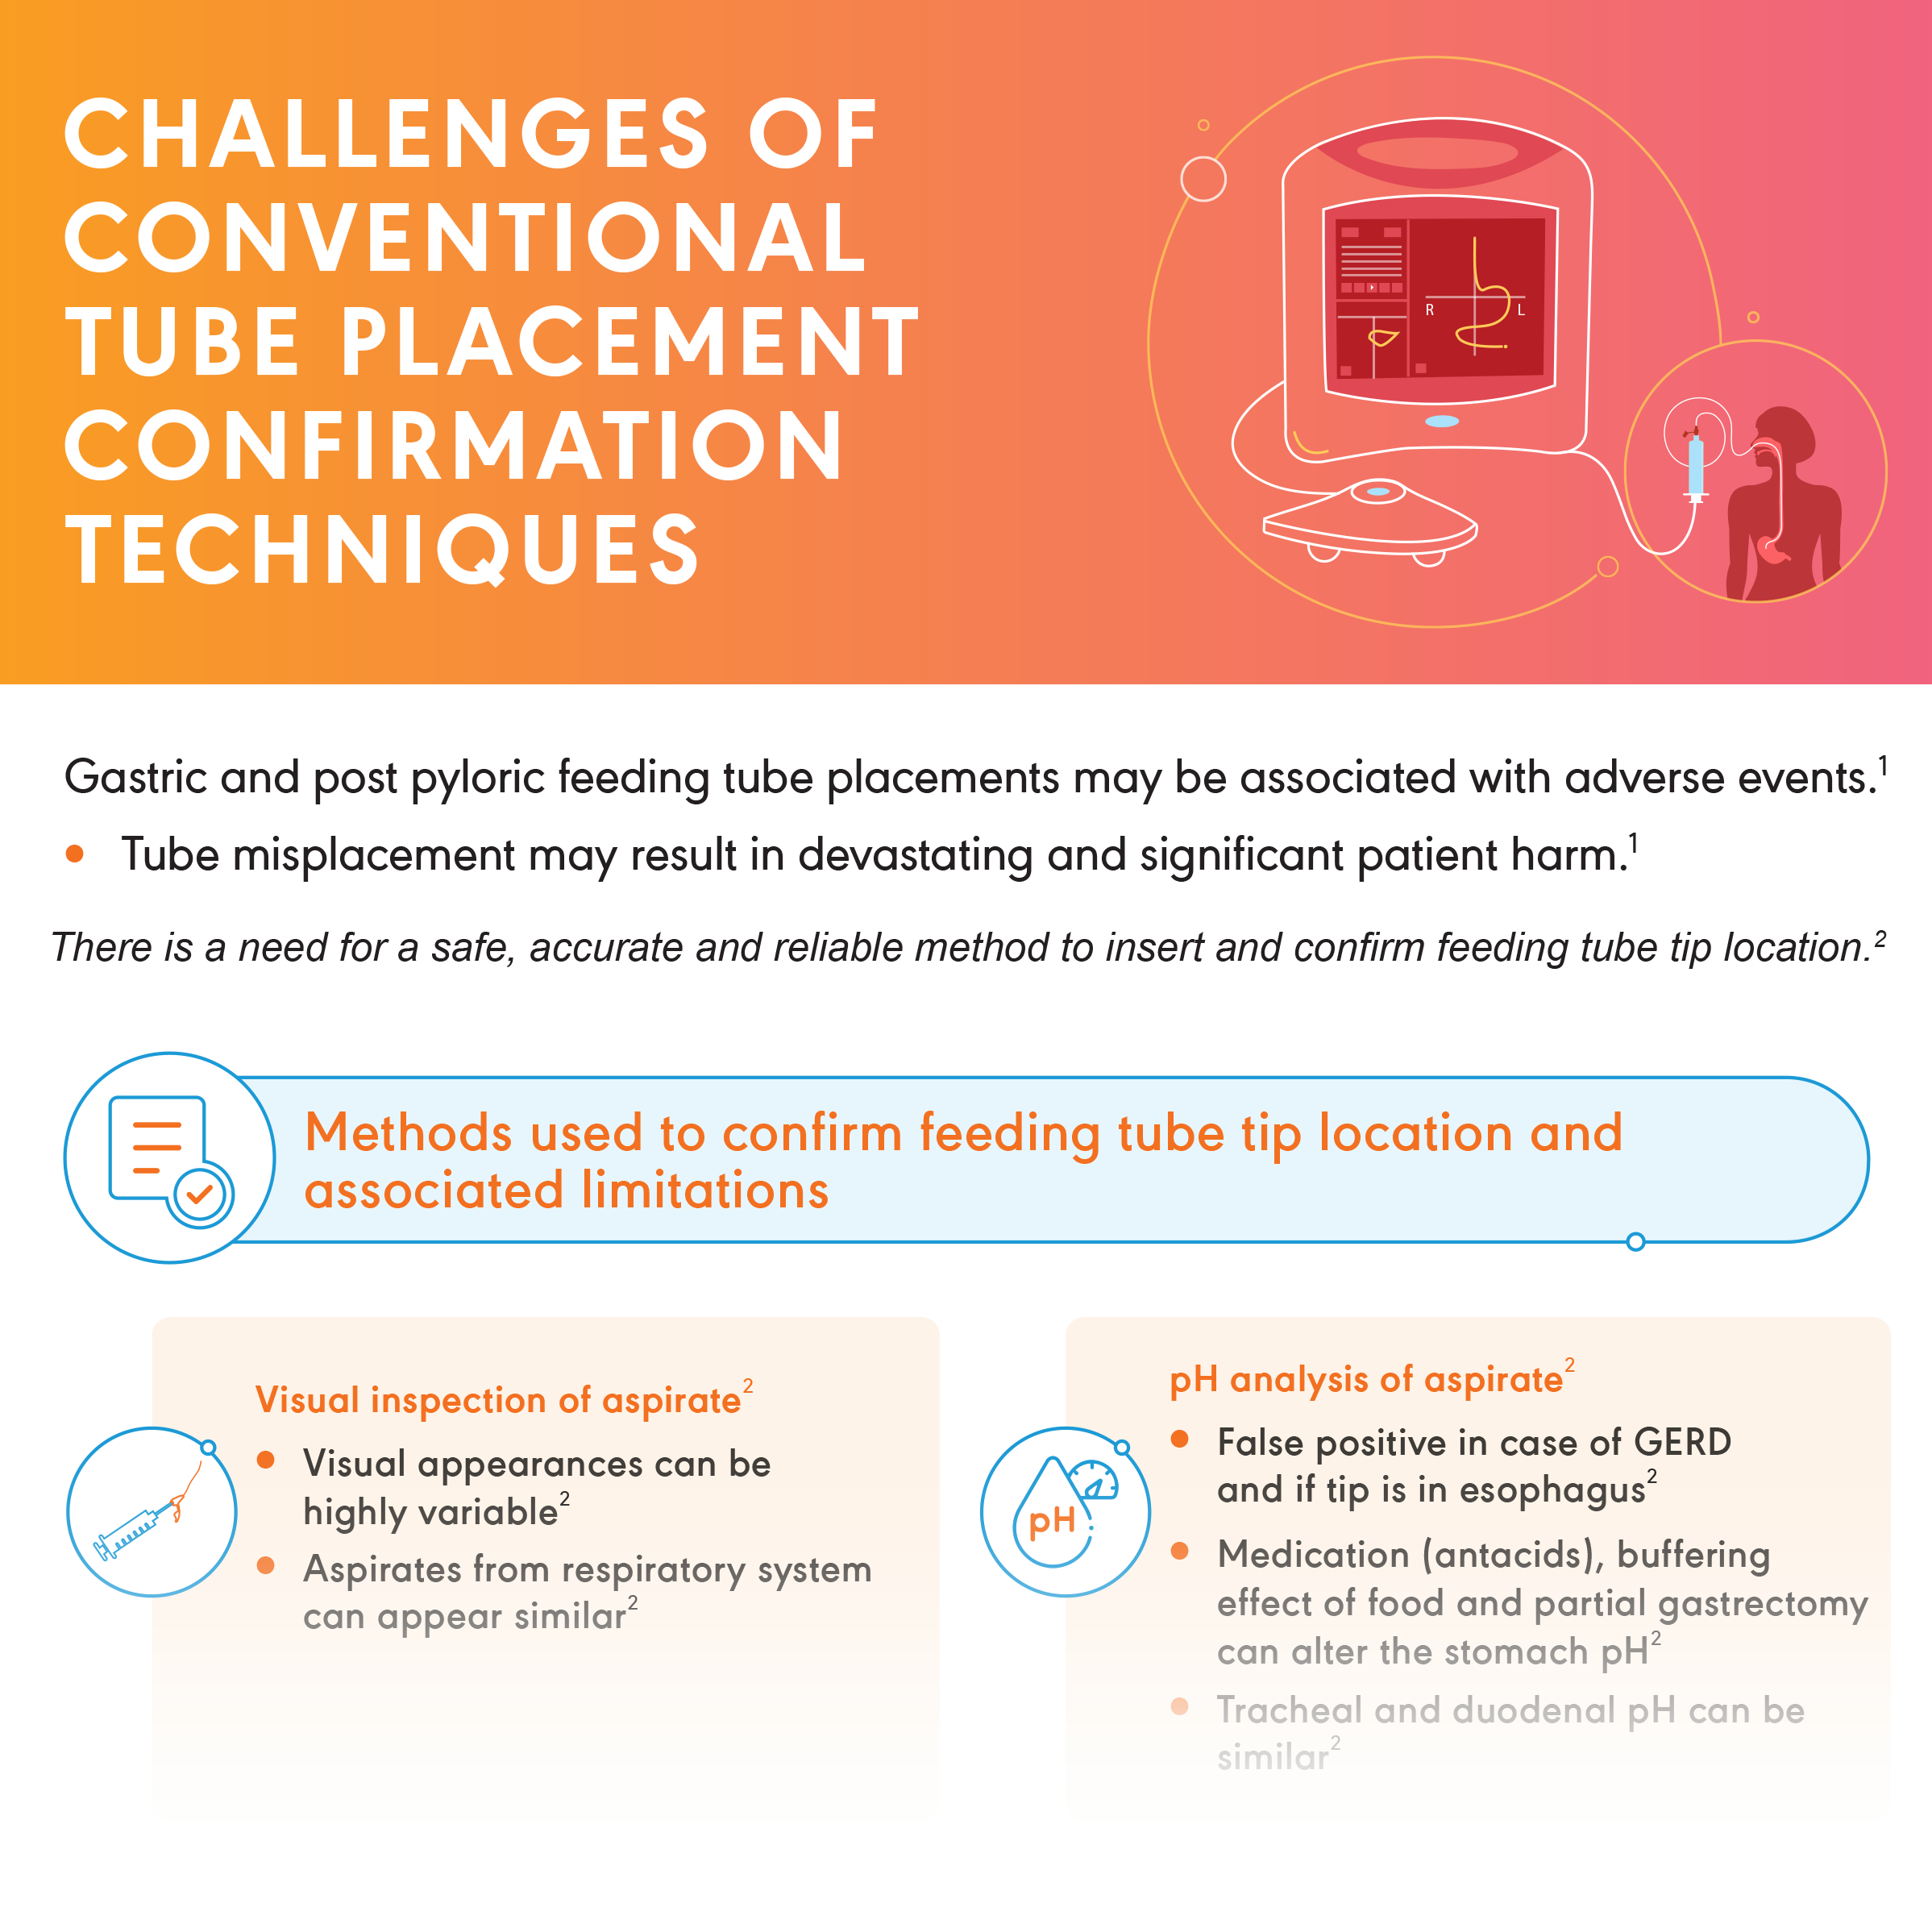 Challenges of Conventional Tube Placement Confirmation Techniques